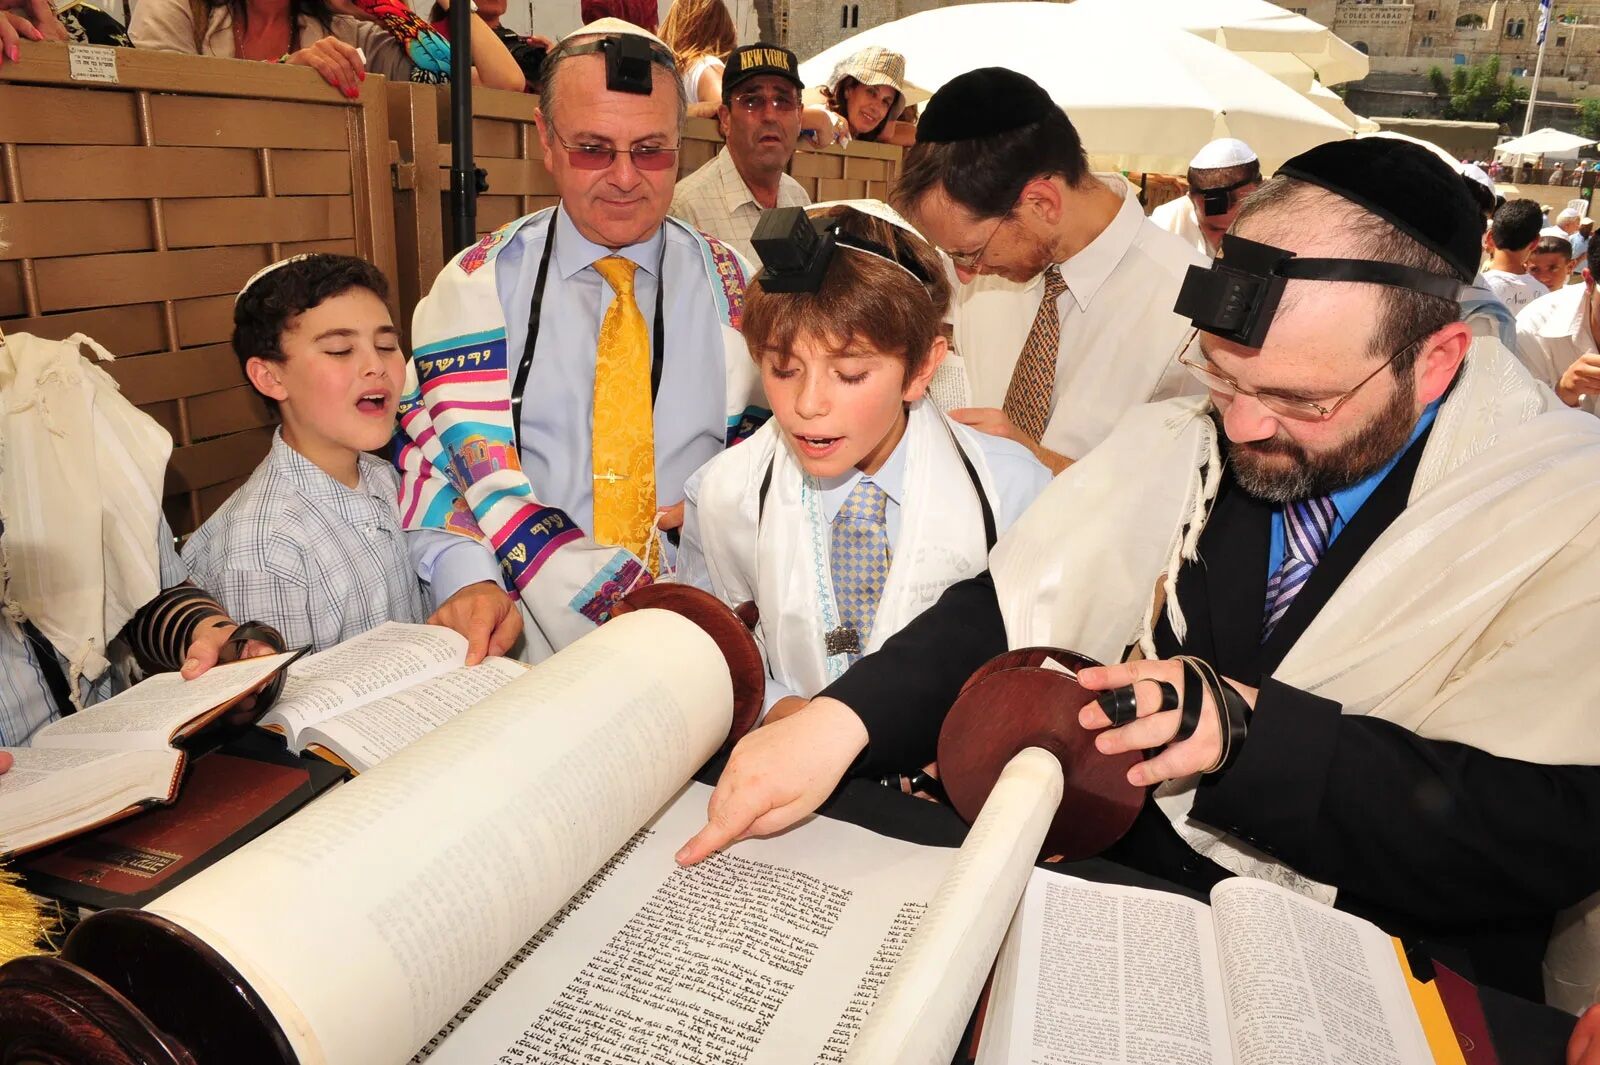 20-interesting-facts-about-jewish-culture